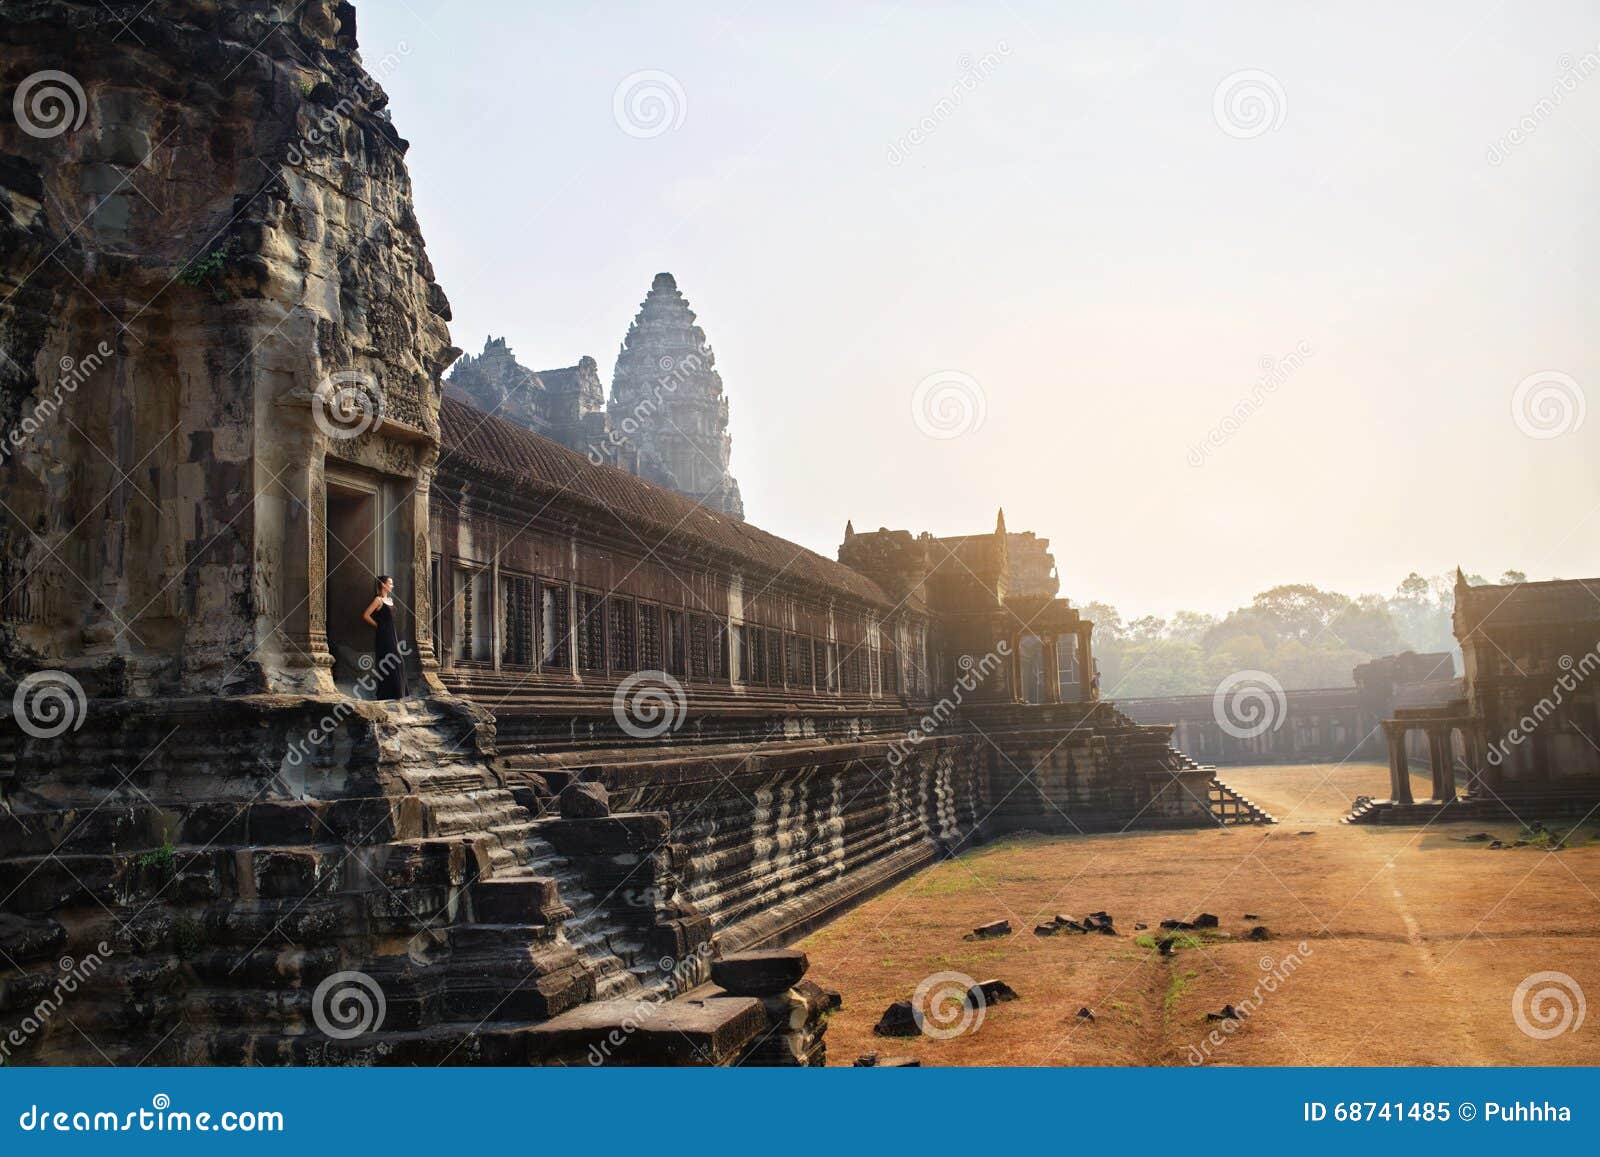 Cambodia Famous Landmark. Angkor Wat Temple. Tourist Attraction, Travel  Asia Stock Image - Image Of Monument, Buddhist: 68741485